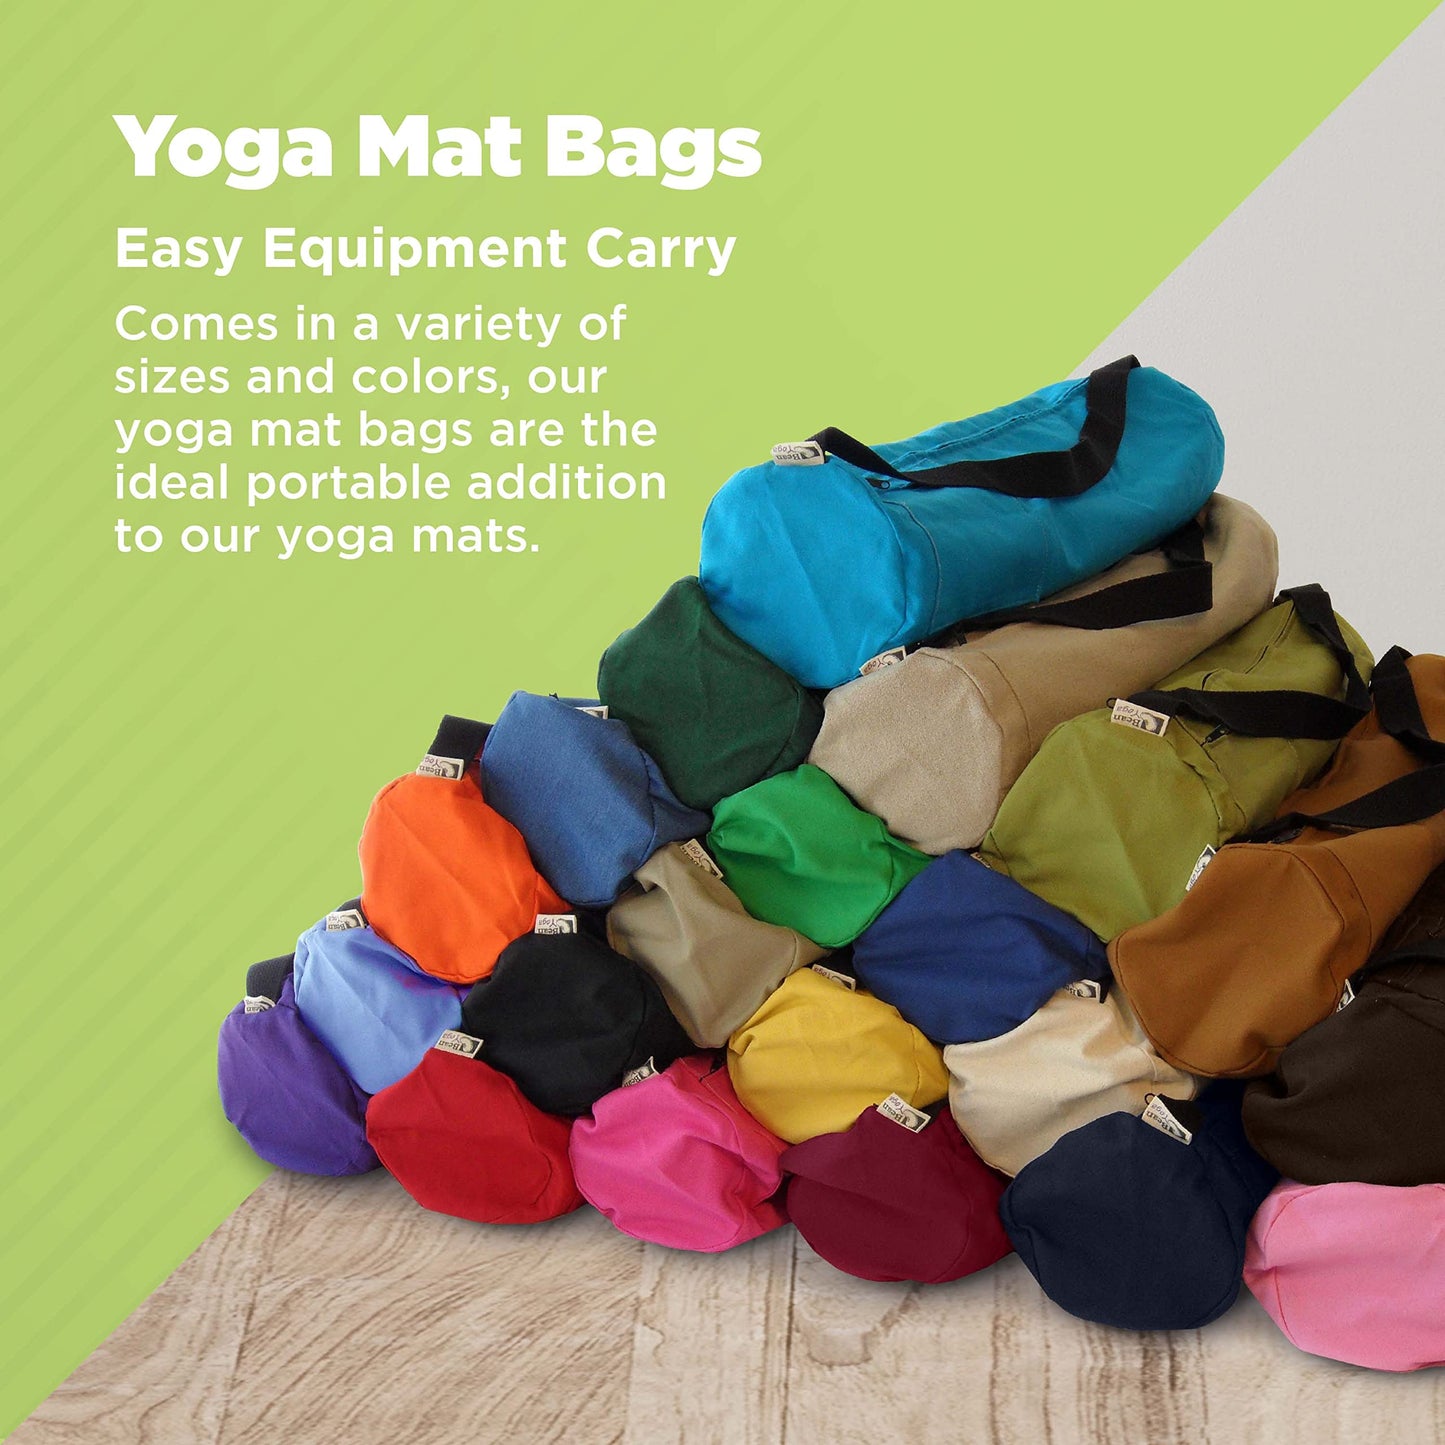 Bean Products Cotton Yoga Mat Bag for Superior Protection - Forest Green Yoga Mat Carrying Bag in Assorted Colors & 2 Sizes - Made With Storage Pocket - Durable Cotton Mat Bag with Strap - 8" x 32